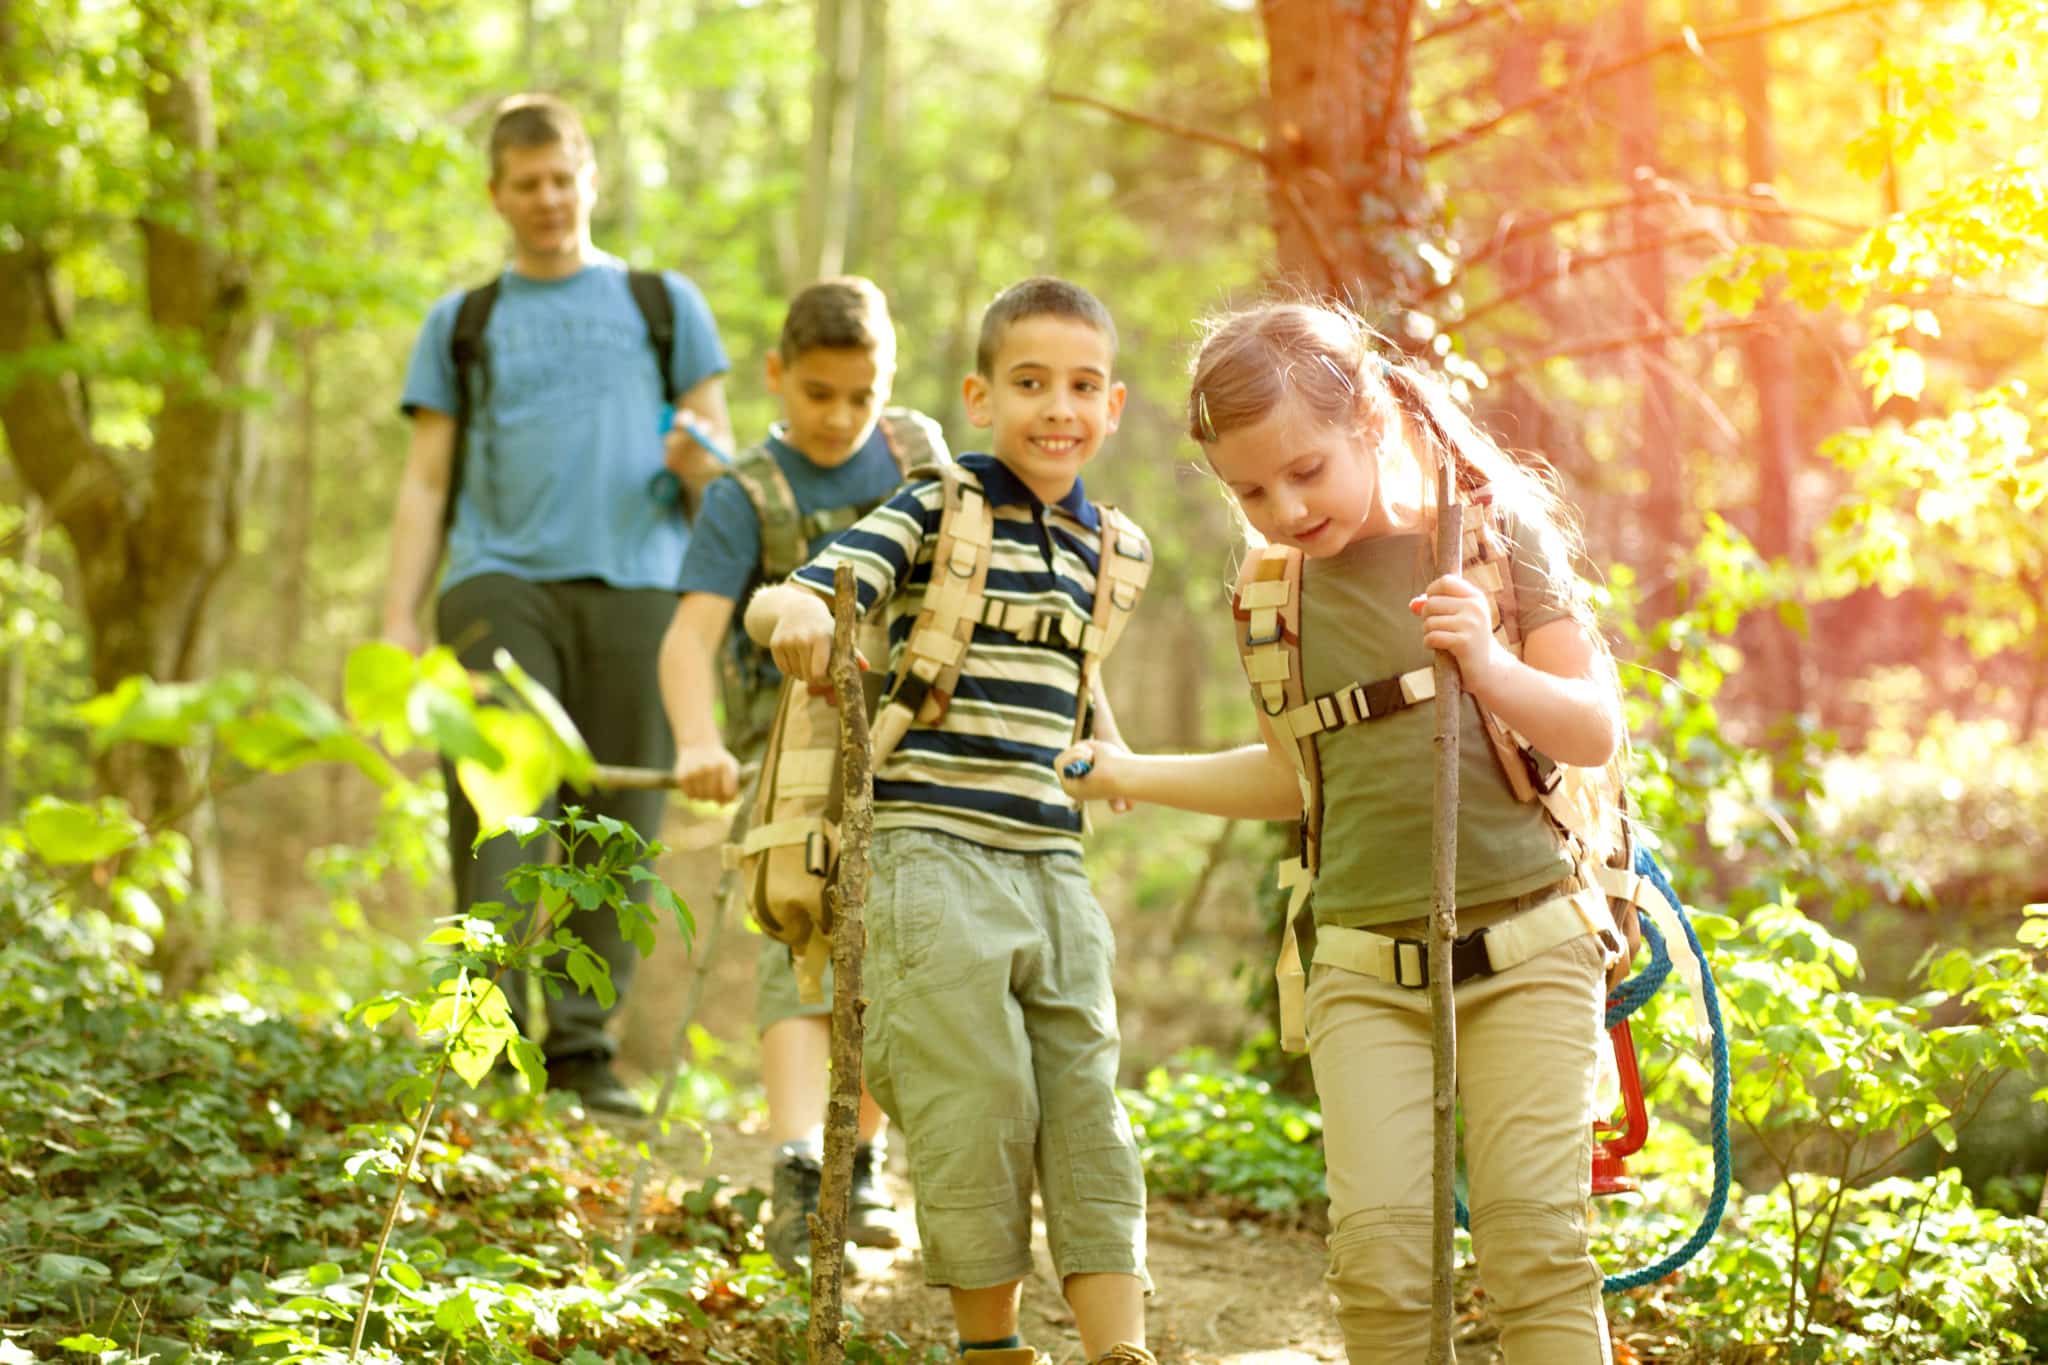 Kids hiking outdoors surrounded by trees